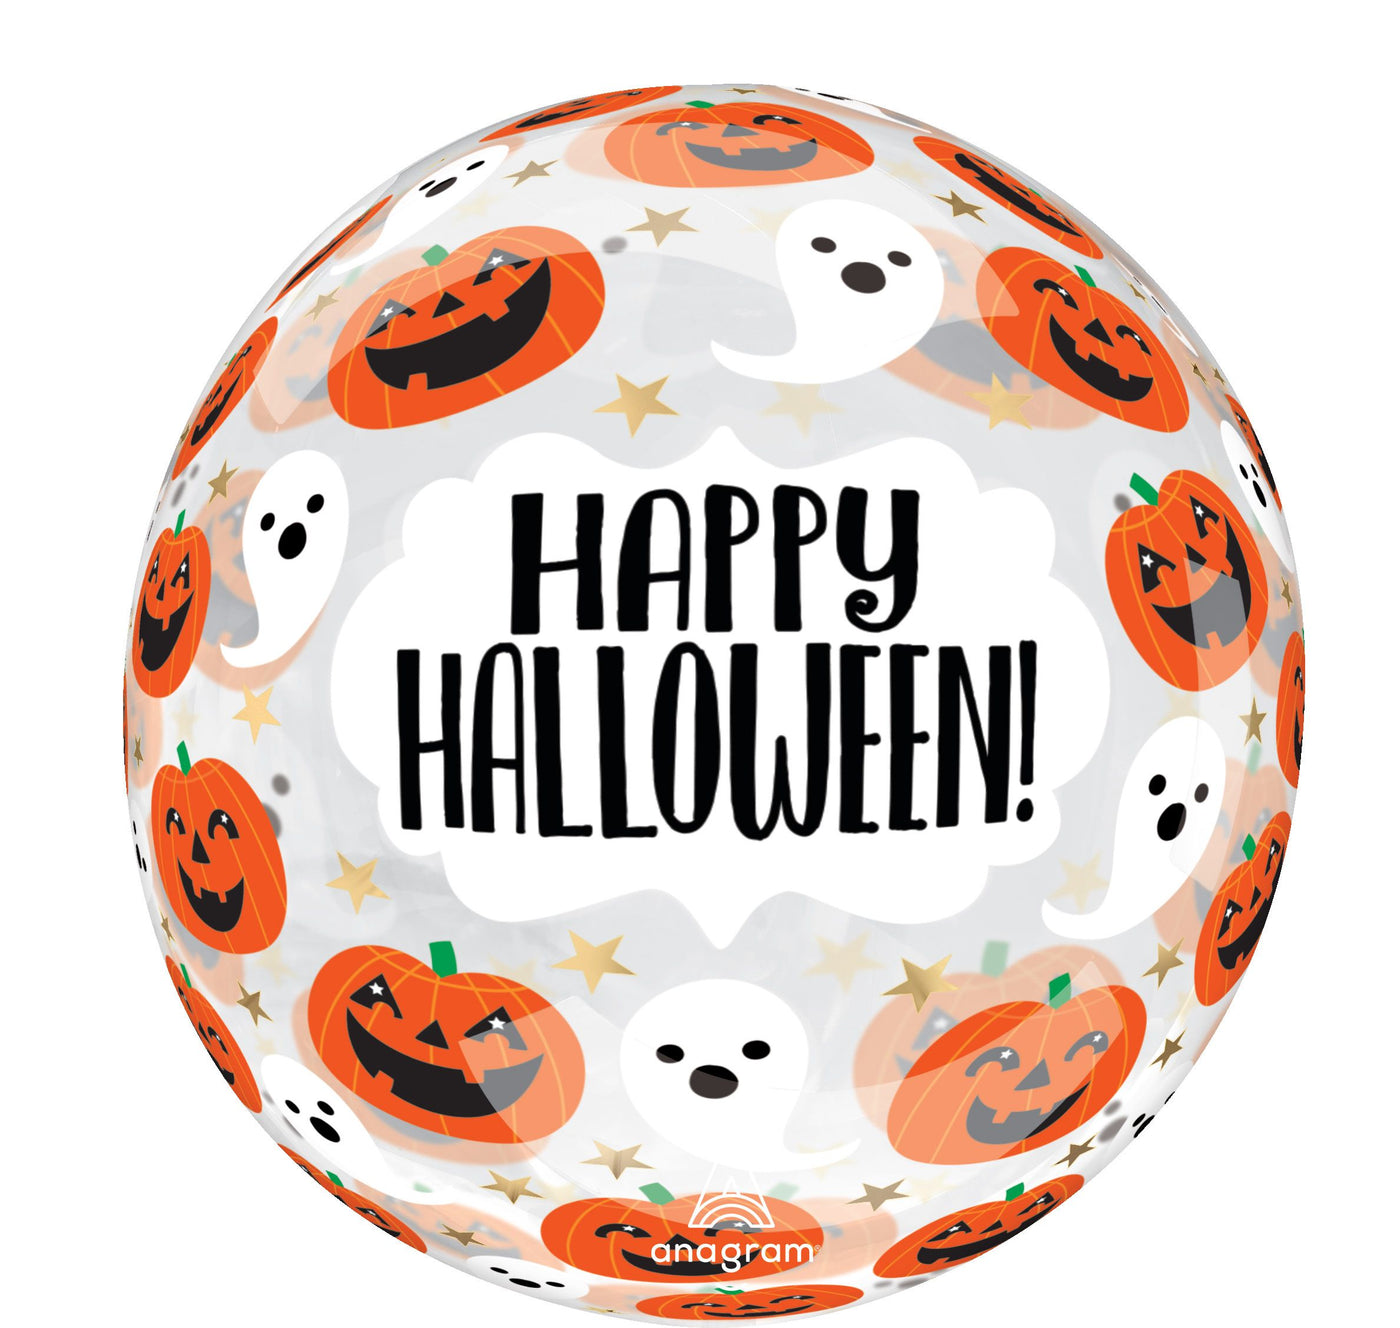 Clearz Printed Fun and Spooky Pumpkins and Ghosts Balloon